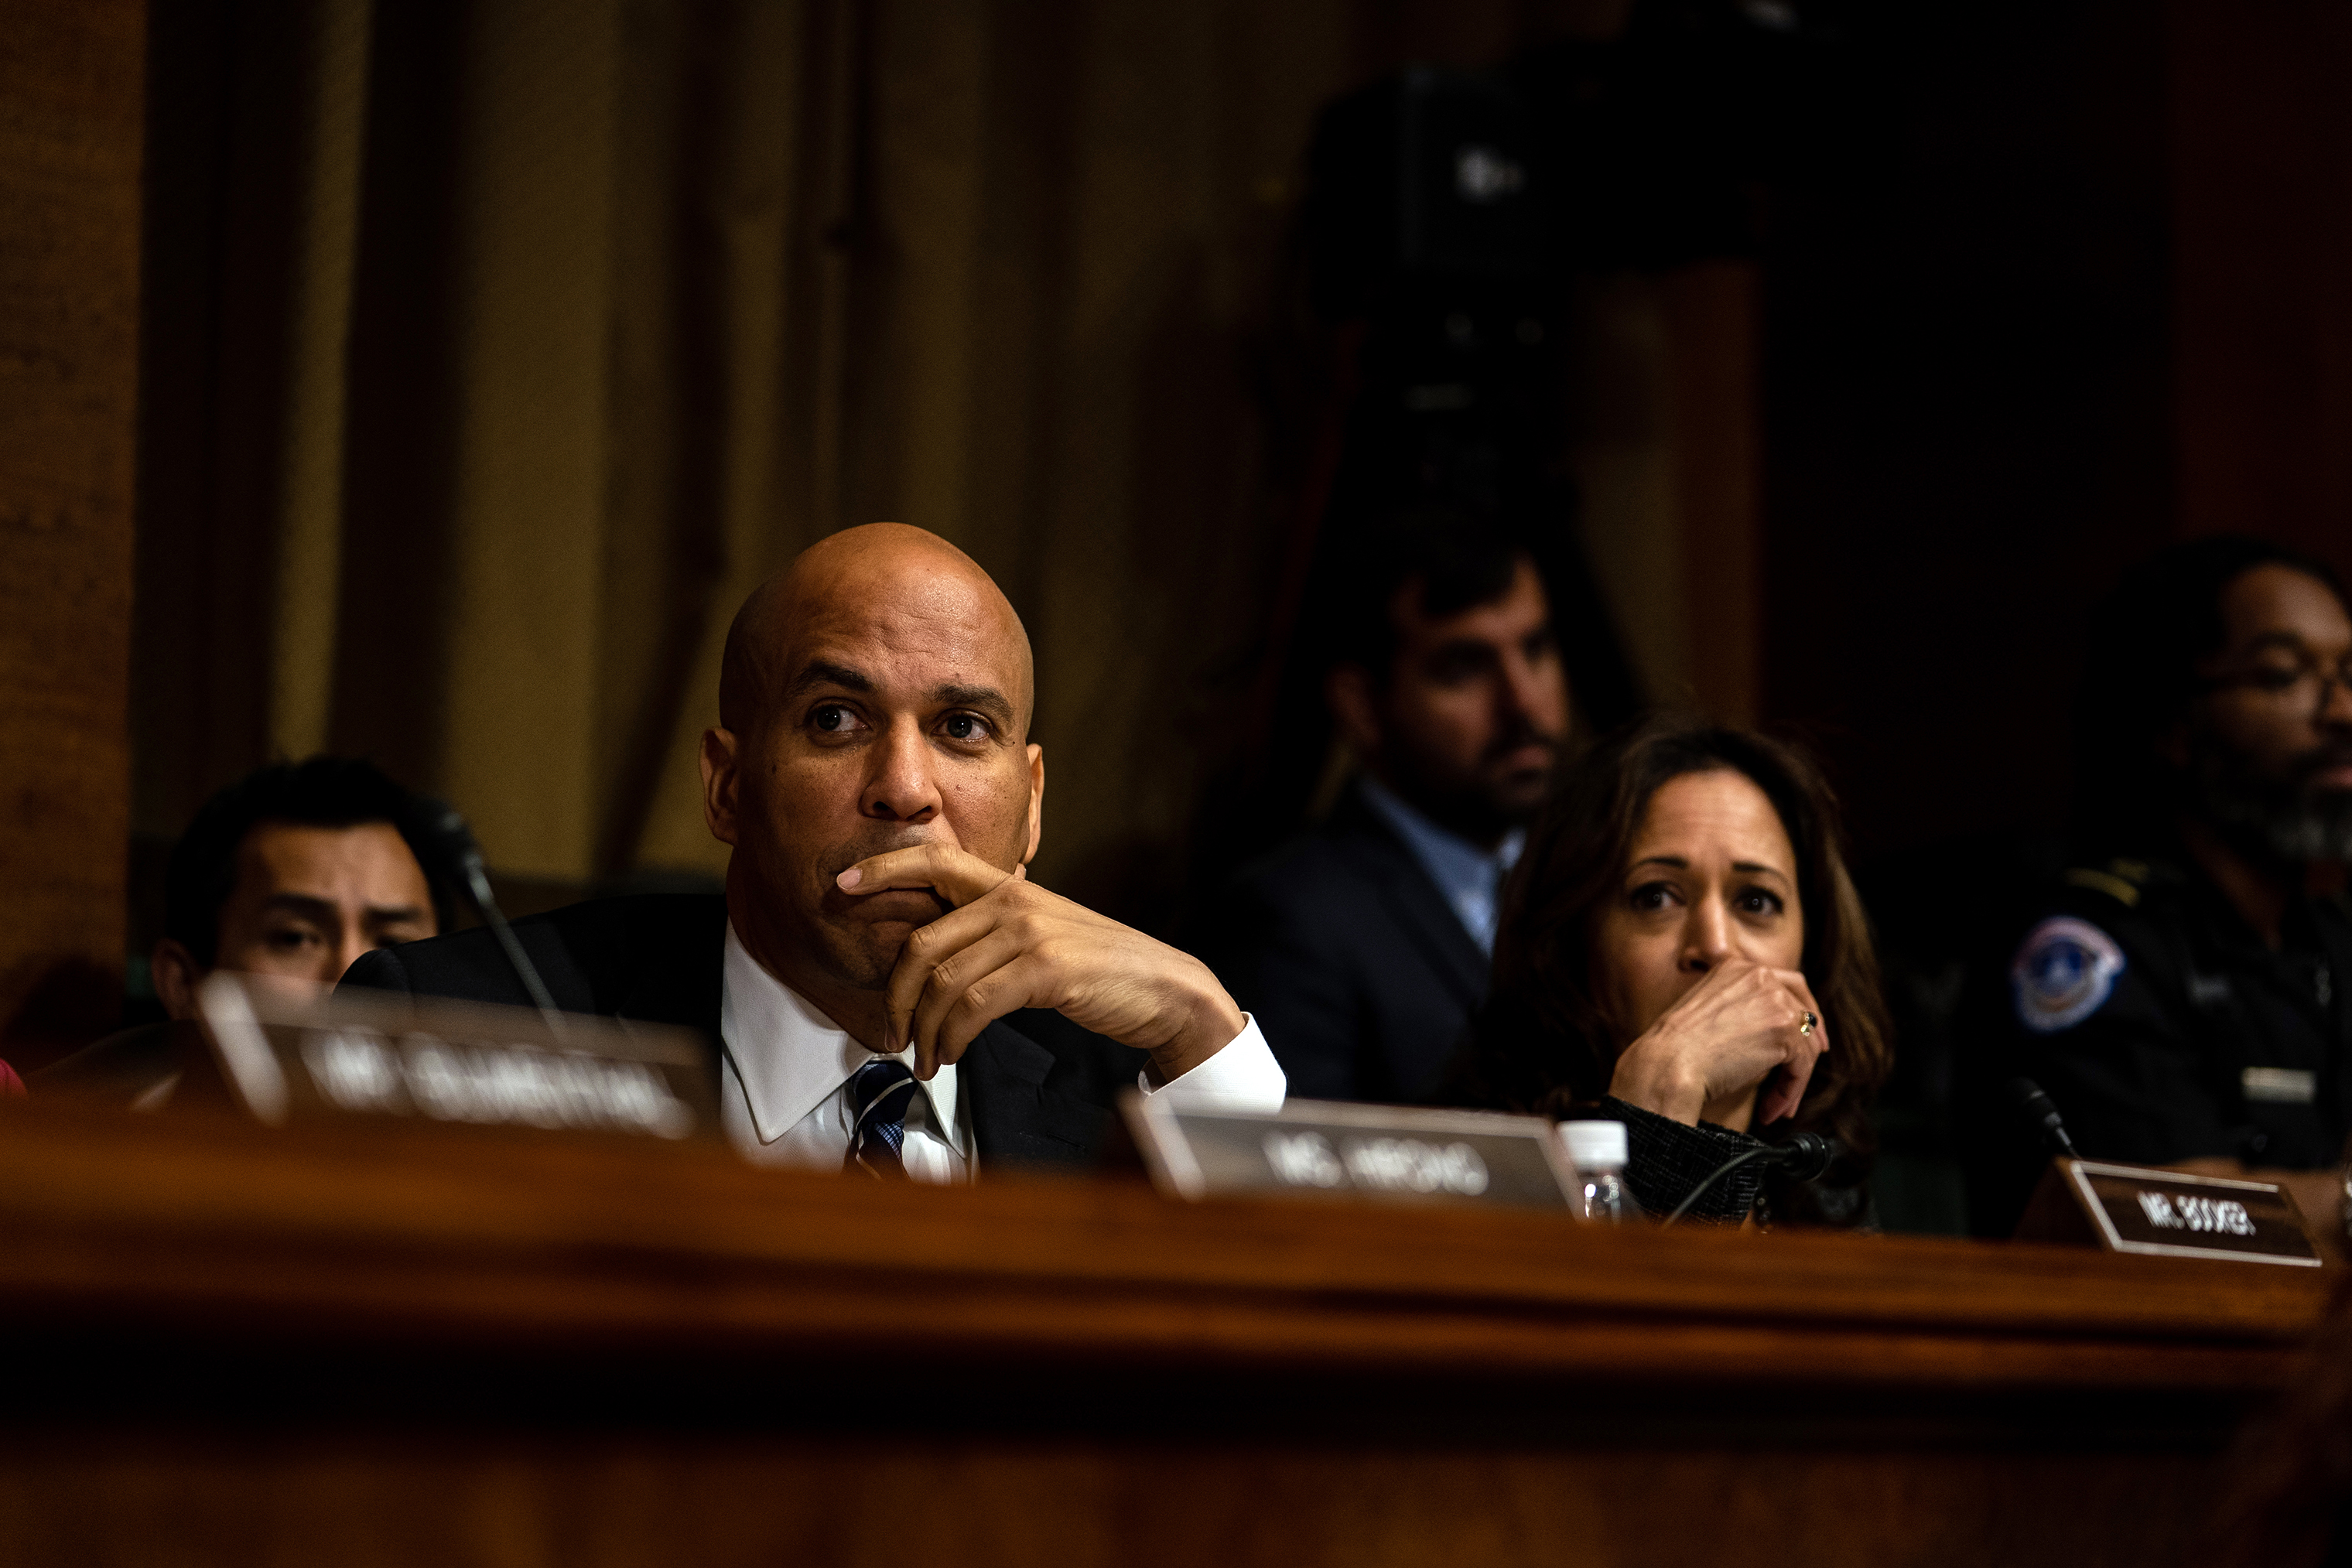 Sens. Cory Booker (D-NJ) and Kamala Harris (D-CA) listen during testimony on Sept. 27. (Erin Schaff—The New York Times/Pool/Getty Images)